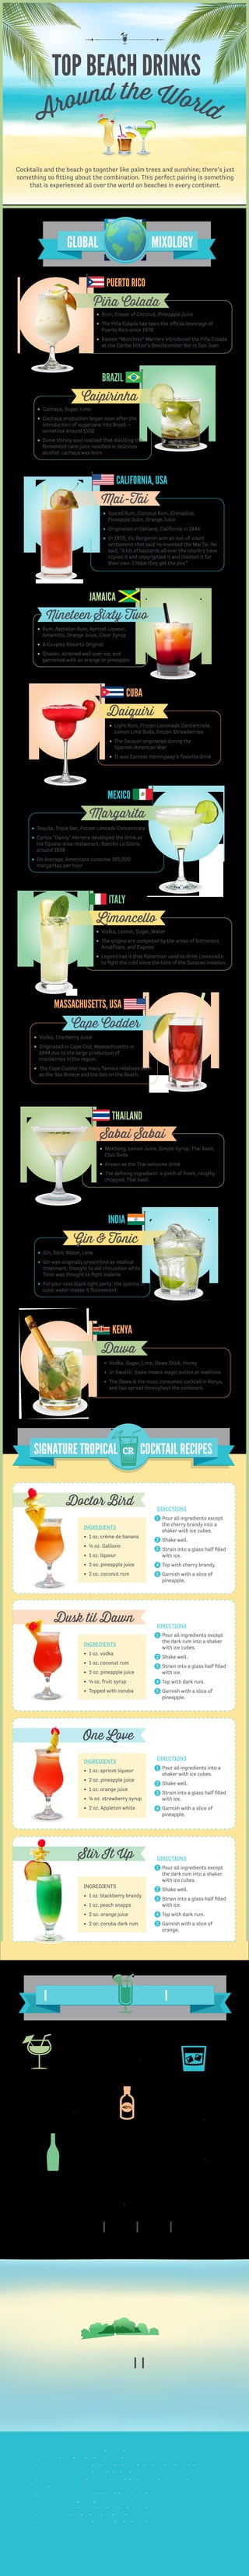 Share your favorite #beachdrinks!
WHAT DID YOU SIP ON THIS
HAVE YOU VISITED
Summer?
Couples Resorts?
Tell us your favorite #couplesdrinks!
SOURCES
http://travel.nationalgeographic.com/travel/top-10/beach-drinks/
http://visual.ly/revealed-hidden-stats-and-facts-cocktail-industry
http://www.examiner.com/article/busting-bar-myths-the-mai-tai-did-not-come-from-hawaii-or-tahiti
http://newworldreview.com/2009/09/the-history-of-the-pina-colada/
http://www.smithsonianmag.com/arts-culture/the-history-of-the-margarita-57990212/?no-ist
http://www.brazil-help.com/cachaca.htm#background
http://www.sipsmith.com/blog/articles/gin-and-tonic-a-short-history-of
http://en.wikipedia.org/wiki/Cape_Codder_%28cocktail%29
http://totalbeverage.net/mixology-monday-sabai-sabai-thai-welcome-drink
http://www.flask.com/20-fun-facts-you-didnt-know-about-alcohol/#.U5ca5SgVA70
http://www.curiousread.com/2009/03/35-interesting-and-fun-alcohol-facts.html#WGzXiopjZHV1q6u1.99
Brought to you by:
Cocktails and the beach go together like palm trees and sunshine; there’s just
something so ﬁtting about the combination. This perfect pairing is something
that is experienced all over the world on beaches in every continent.
TOP BEACH DRINKS
DID YOU KNOW? {DRINK FACTS}
Alcohol hosts the 13
MINERALS that are
ESSENTIAL for human life.
How bubbly is your bubbly? A bottle of
champagne has about 49 MILLION BUBBLES.
Congress declared
in 1964 that the
OFFICIAL SPIRIT of
the United States
is BOURBON.
Distilled Spirits contain
NO fats, cholesterol or
carbohydrates.
DIRECTIONS
Pour all ingredients except
the cherry brandy into a
shaker with ice cubes.
Shake well.
Strain into a glass half ﬁlled
with ice.
Top with cherry brandy.
Garnish with a slice of
pineapple.
Doctor Bird
DIRECTIONS
Pour all ingredients except
the dark rum into a shaker
with ice cubes.
Shake well.
Strain into a glass half ﬁlled
with ice.
Top with dark rum.
Garnish with a slice of
pineapple.
Dusk til Dawn
DIRECTIONS
Pour all ingredients into a
shaker with ice cubes.
Shake well.
Strain into a glass half ﬁlled
with ice.
Garnish with a slice of
pineapple.
One Love
DIRECTIONS
Pour all ingredients except
the dark rum into a shaker
with ice cubes.
Shake well.
Strain into a glass half ﬁlled
with ice.
Top with dark rum.
Garnish with a slice of
orange.
Stir It Up
INGREDIENTS
• 1 oz. crème de banana
• ½ oz. Galliano
• 1 oz. liqueur
• 2 oz. pineapple juice
• 2 oz. coconut rum
INGREDIENTS
• 1 oz. vodka
• 1 oz. coconut rum
• 2 oz. pineapple juice
• ¼ oz. fruit syrup
• Topped with coruba
INGREDIENTS
• 1 oz. apricot liqueur
• 2 oz. pineapple juice
• 1 oz. orange juice
• ¼ oz. strawberry syrup
• 2 oz. Appleton white
INGREDIENTS
• 1 oz. blackberry brandy
• 1 oz. peach snapps
• 2 oz. orange juice
• 2 oz. coruba dark rum
1
2
3
4
5
1
2
3
4
5
1
2
3
4
1
2
3
4
5
SIGNATURE TROPICAL COCKTAIL RECIPESCR
• Rum, Cream of Coconut, Pineapple Juice
• The Piña Colada has been the official beverage of
Puerto Rico since 1978.
• Ramon “Monchito” Marrero introduced the Piña Colada
at the Caribe Hilton’s Beachcomber Bar in San Juan
Piña Colada
PUERTO RICO
• Spiced Rum, Coconut Rum, Grenadine,
Pineapple Juice, Orange Juice
• Originated in Oakland, California in 1944
• In 1970, Vic Bergeron won an out-of-court
settlement that said he invented the Mai Tai. He
said, "A lot of bastards all over the country have
copied it and copyrighted it and claimed it for
their own. I hope they get the pox.”
Mai-Tai
CALIFORNIA, USA
• Cachaça, Sugar, Lime
• Cachaça production began soon after the
introduction of sugarcane into Brazil —
sometime around 1550.
• Some thirsty soul realized that distilling the
fermented cane juice resulted in delicious
alcohol: cachaça was born.
Caipirinha
BRAZIL
• Tequila, Triple Sec, Frozen Limeade Concentrate
• Carlos "Danny" Herrera developed the drink at
his Tijuana-area restaurant, Rancho La Gloria,
around 1938
• On Average, Americans consume 185,000
margaritas per hour
Margarita
MEXICO
• Rum, Appleton Rum, Apricot Liqueur,
Amaretto, Orange Juice, Clear Syrup
• A Couples Resorts Original
• Shaken, strained well over ice, and
garnished with an orange or pineapple
JAMAICA
• Light Rum, Frozen Lemonade Concentrate,
Lemon Lime Soda, Frozen Strawberries
• The Daiquiri originated during the
Spanish-American War
• It was Earnest Hemingway’s favorite drink
Daiquiri
CUBA
Nineteen Sixty Two
• Vodka, Sugar, Lime, Dawa Stick, Honey
• In Swahili, Dawa means magic potion or medicine
• The Dawa is the most consumed cocktail in Kenya,
and has spread throughout the continent.
Dawa
KENYA
• Vodka, Lemon, Sugar, Water
• The origins are competed by the areas of Sorrentini,
Amalﬁtani, and Capresi
• Legend has it that ﬁsherman used to drink Limoncello
to ﬁght the cold since the time of the Saracen invasion.
Limoncello
ITALY
• Vodka, Cranberry Juice
• Originated in Cape Cod, Massachusetts in
1944 due to the large production of
cranberries in the region.
• The Cape Codder has many famous relatives such
as the Sea Breeze and the Sex on the Beach.
Cape Codder
MASSACHUSETTS, USA
• Mekhong, Lemon Juice, Simple Syrup, Thai Basil,
Club Soda
• Known as the Thai welcome drink
• The deﬁning ingredient: a pinch of fresh, roughly
chopped, Thai basil.
Sabai Sabai
THAILAND
• Gin, Tonic Water, Lime
• Gin was originally prescribed as medical
treatment, thought to aid circulation while
Tonic was thought to ﬁght malaria
• For your next black light party: the quinine in
tonic water makes it fluorescent
Gin & Tonic
INDIA
GLOBAL MIXOLOGY
 